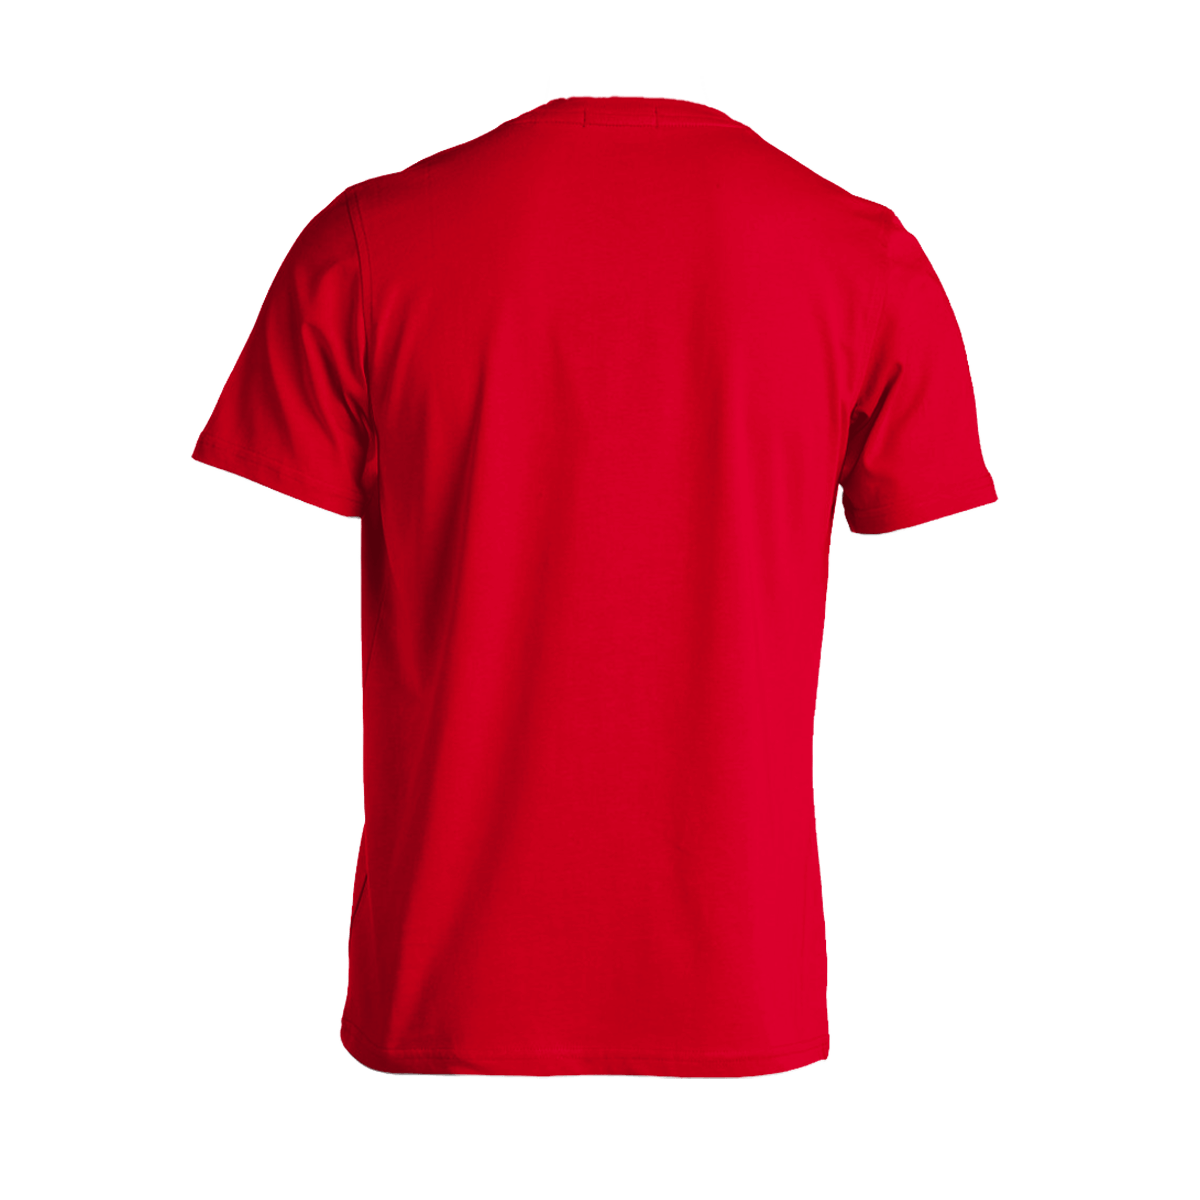 GCN Core Red T-Shirt 